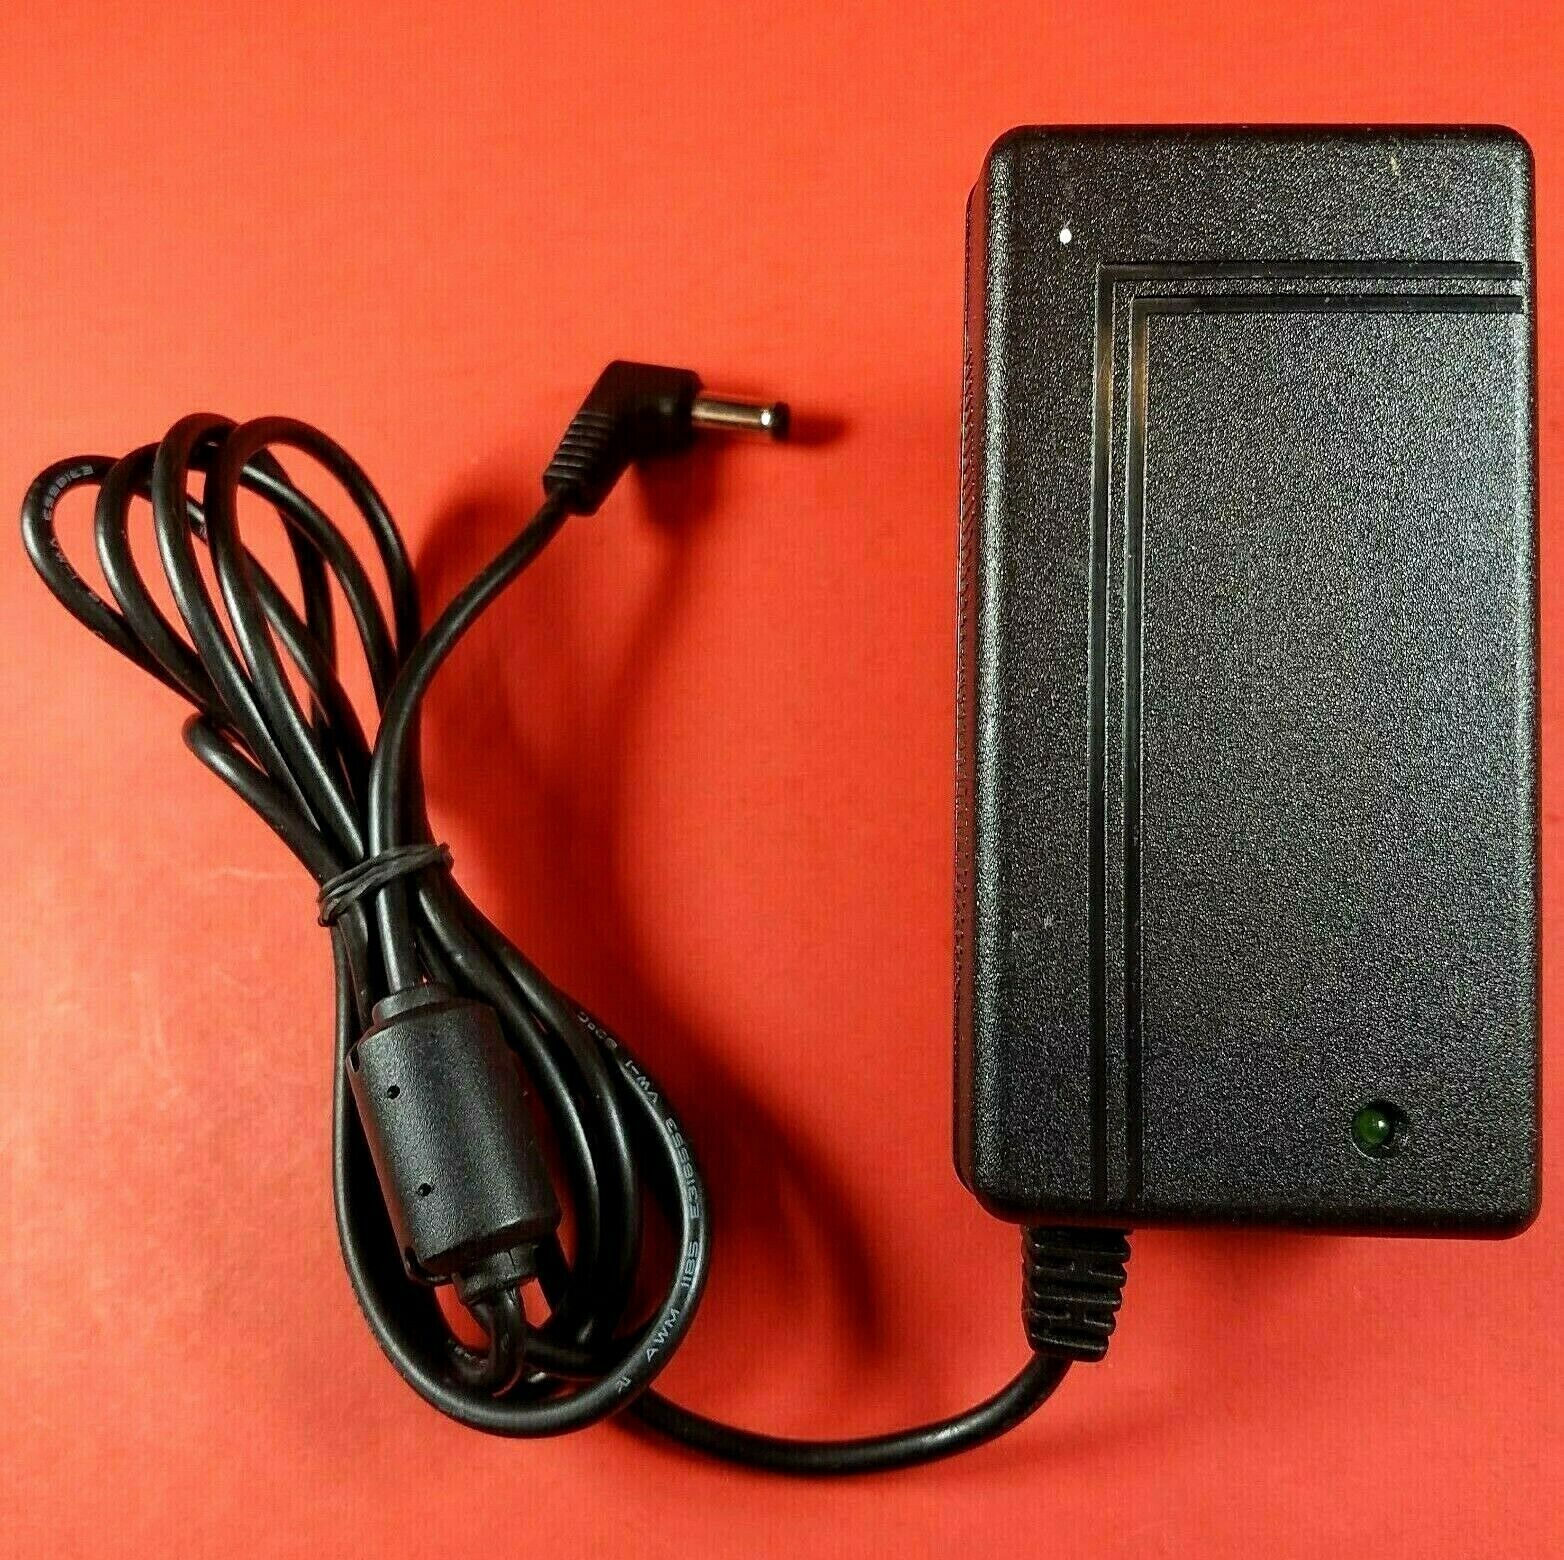 Shenzhen Sunup DC12030013A Power Supply Switching Adaptor 12V - 3A AC/DC Adapter Type: AC/DC Adapter Output Voltage: